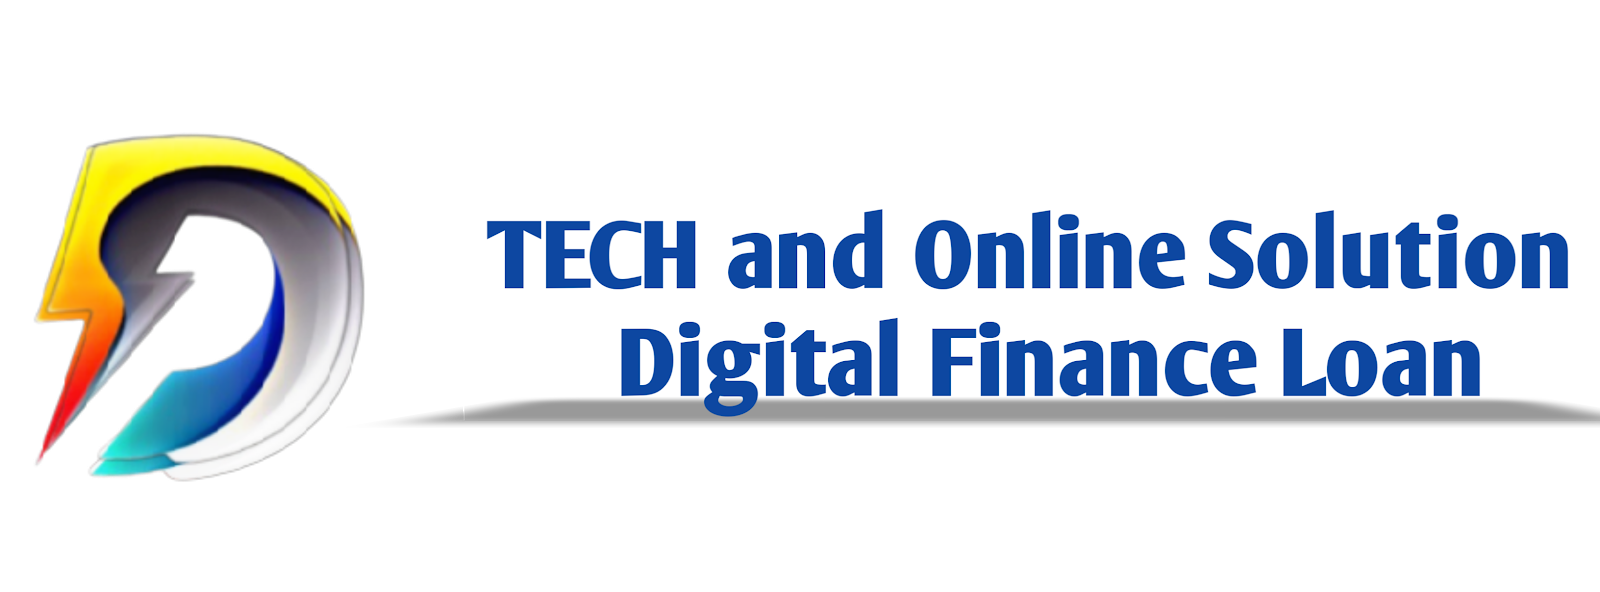 Tech and Online Solution - Digital Personal Loan Online